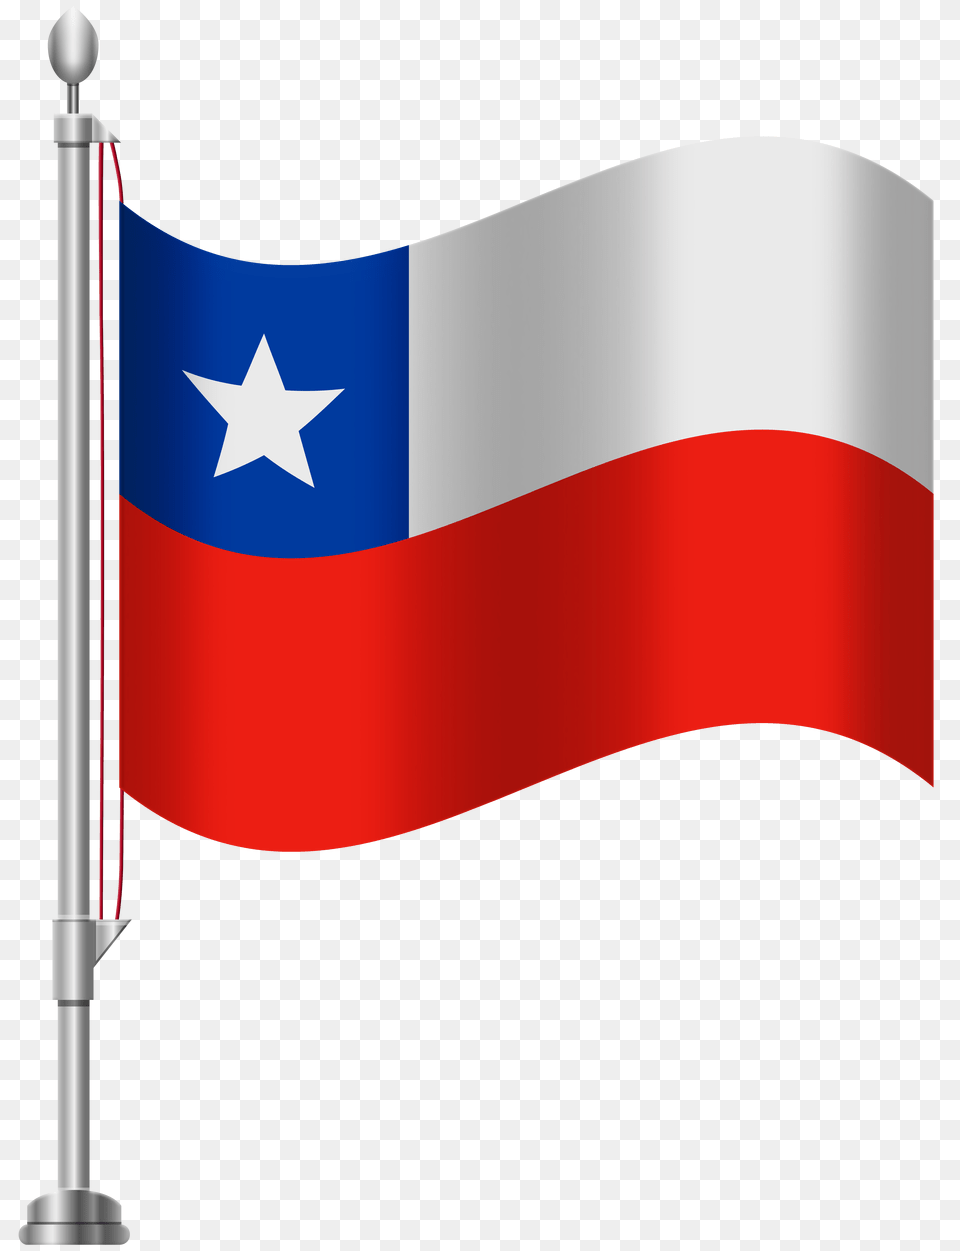 Chile Flag Clip Art, Chile Flag Png